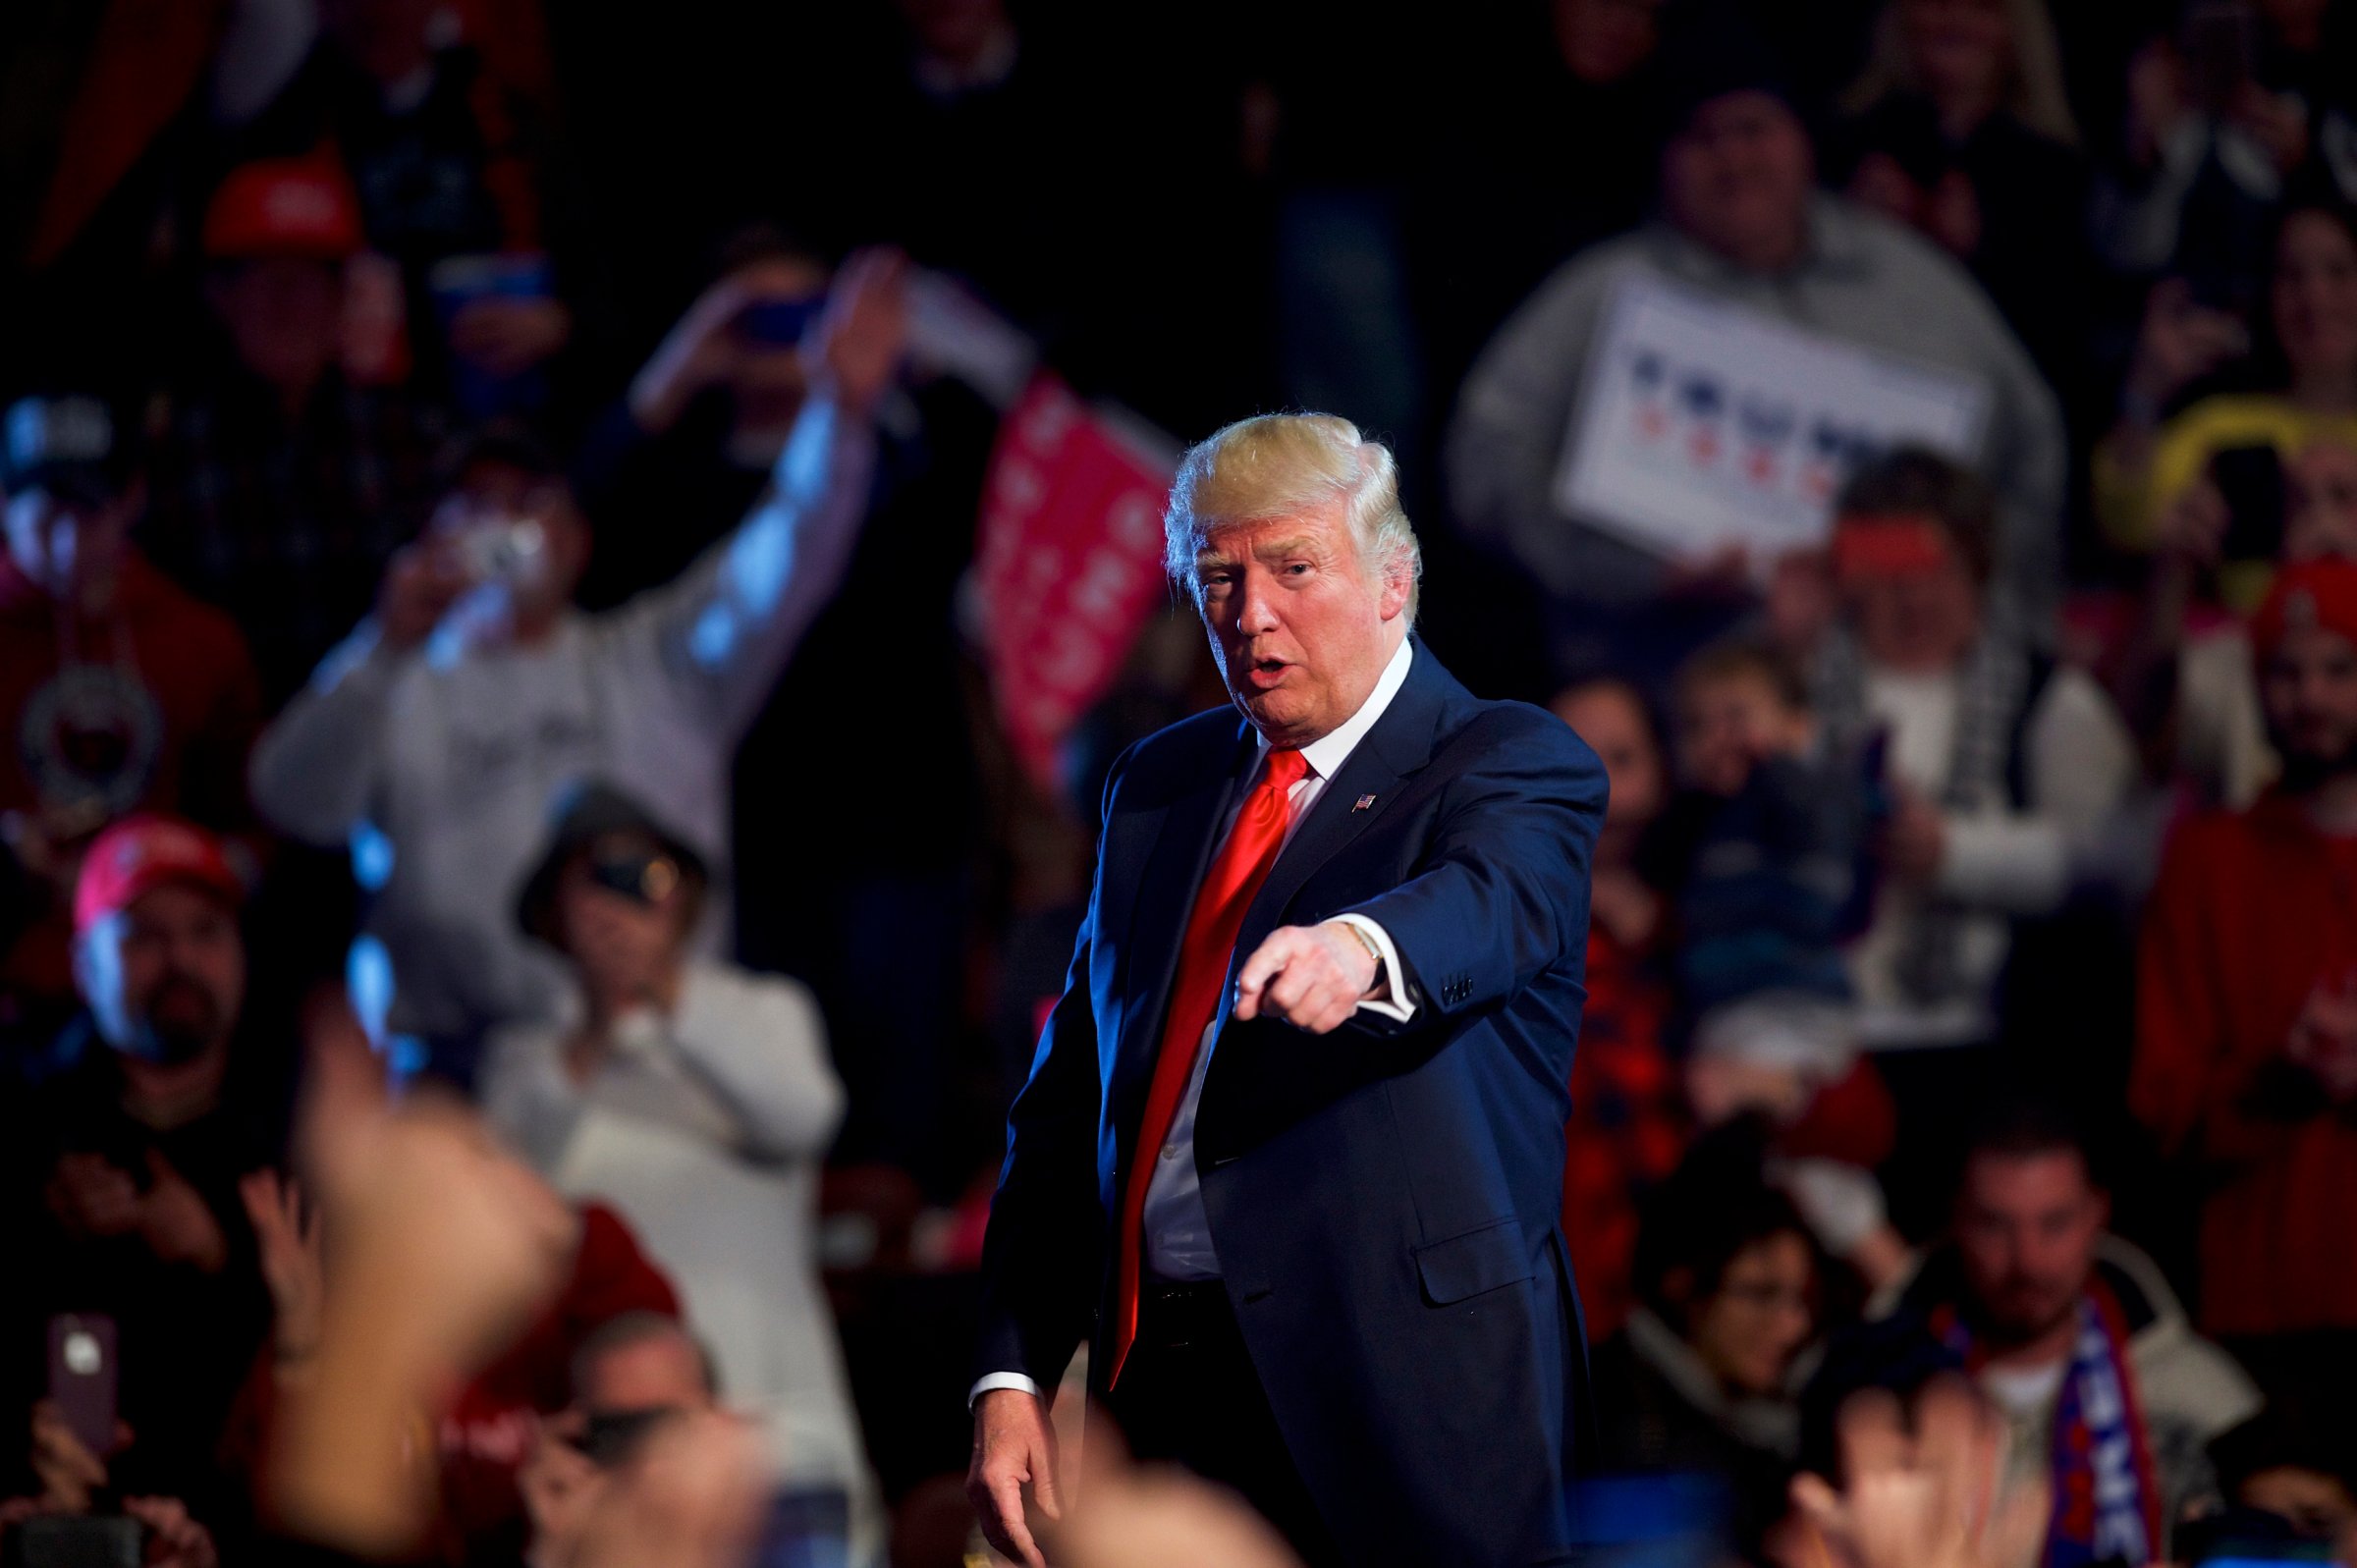 Donald Trump Continues His Election Victory Tour In Hershey, Pennsylvania